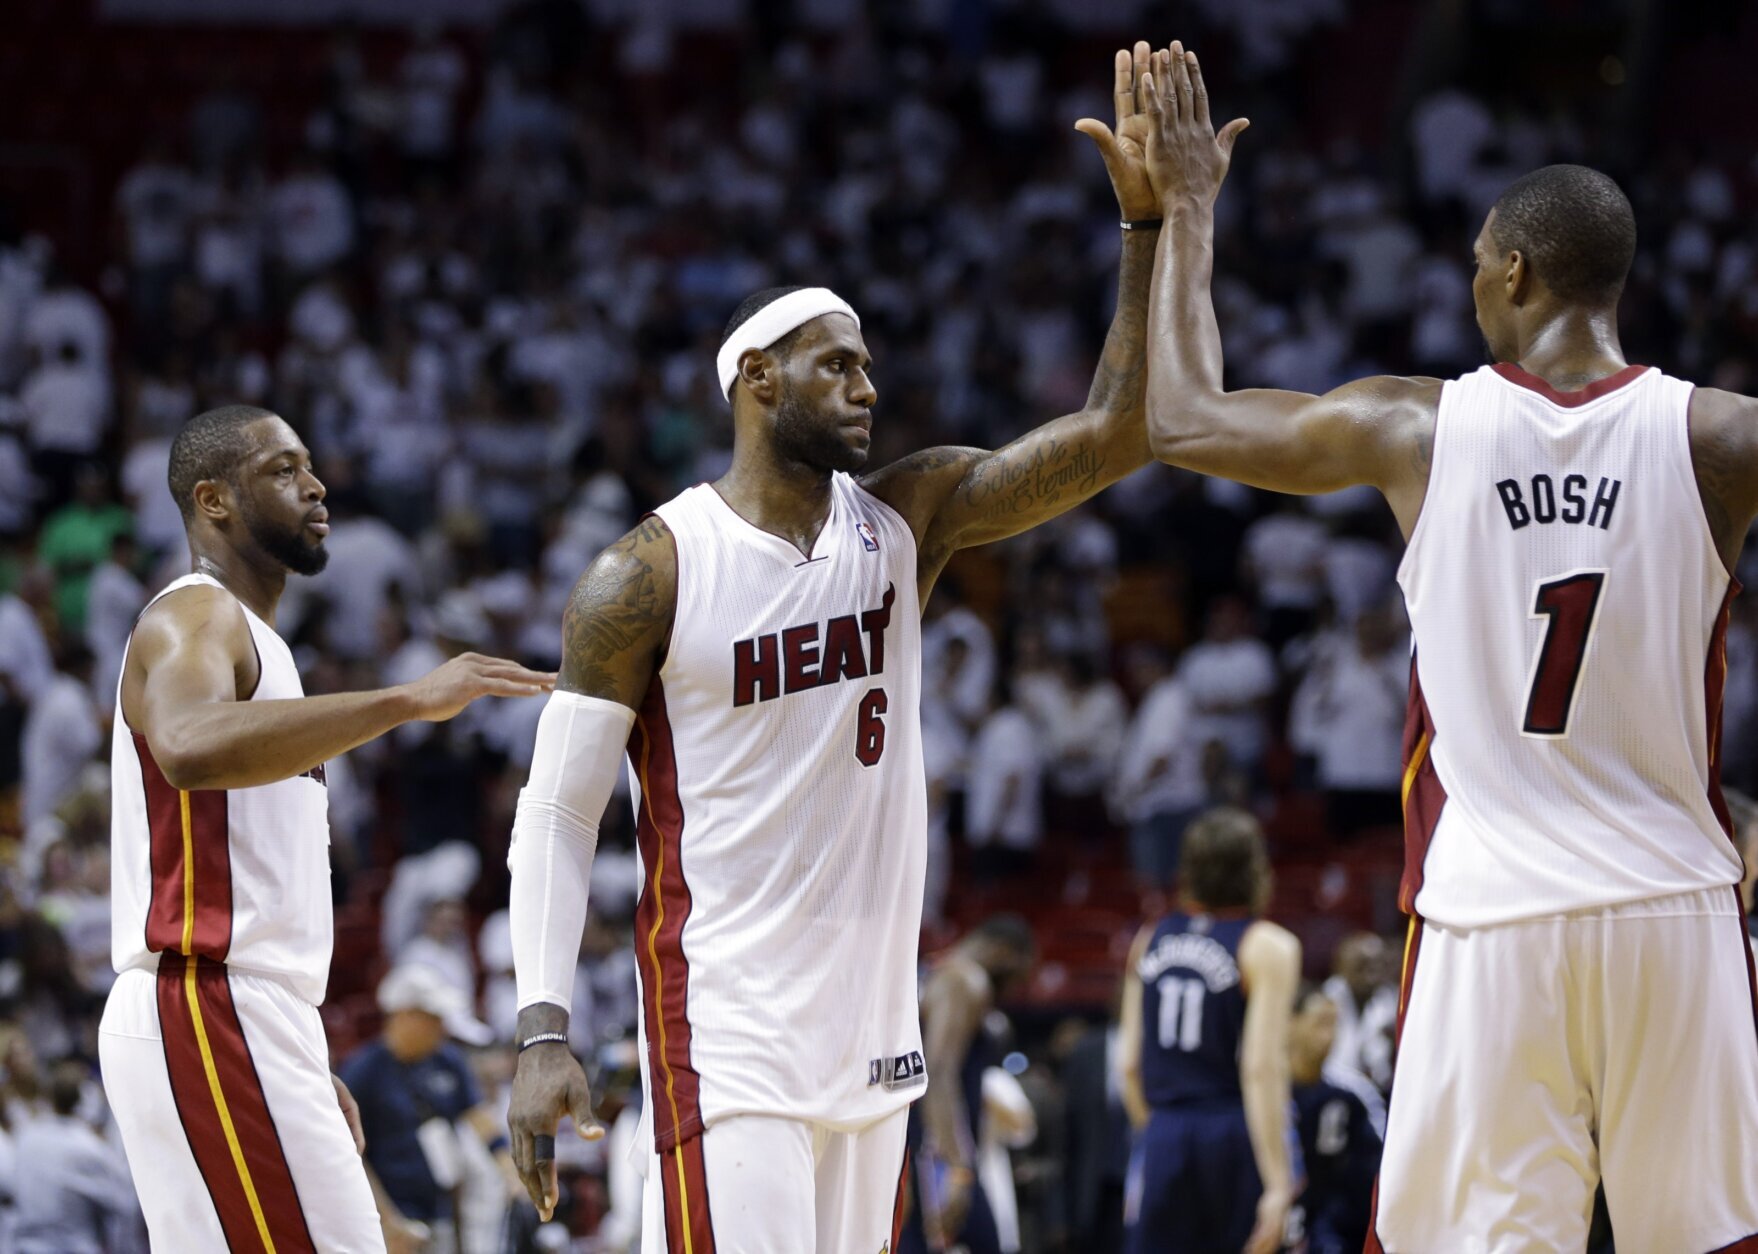 First LeBron James, Chris Bosh cards in Heat jerseys sought-after